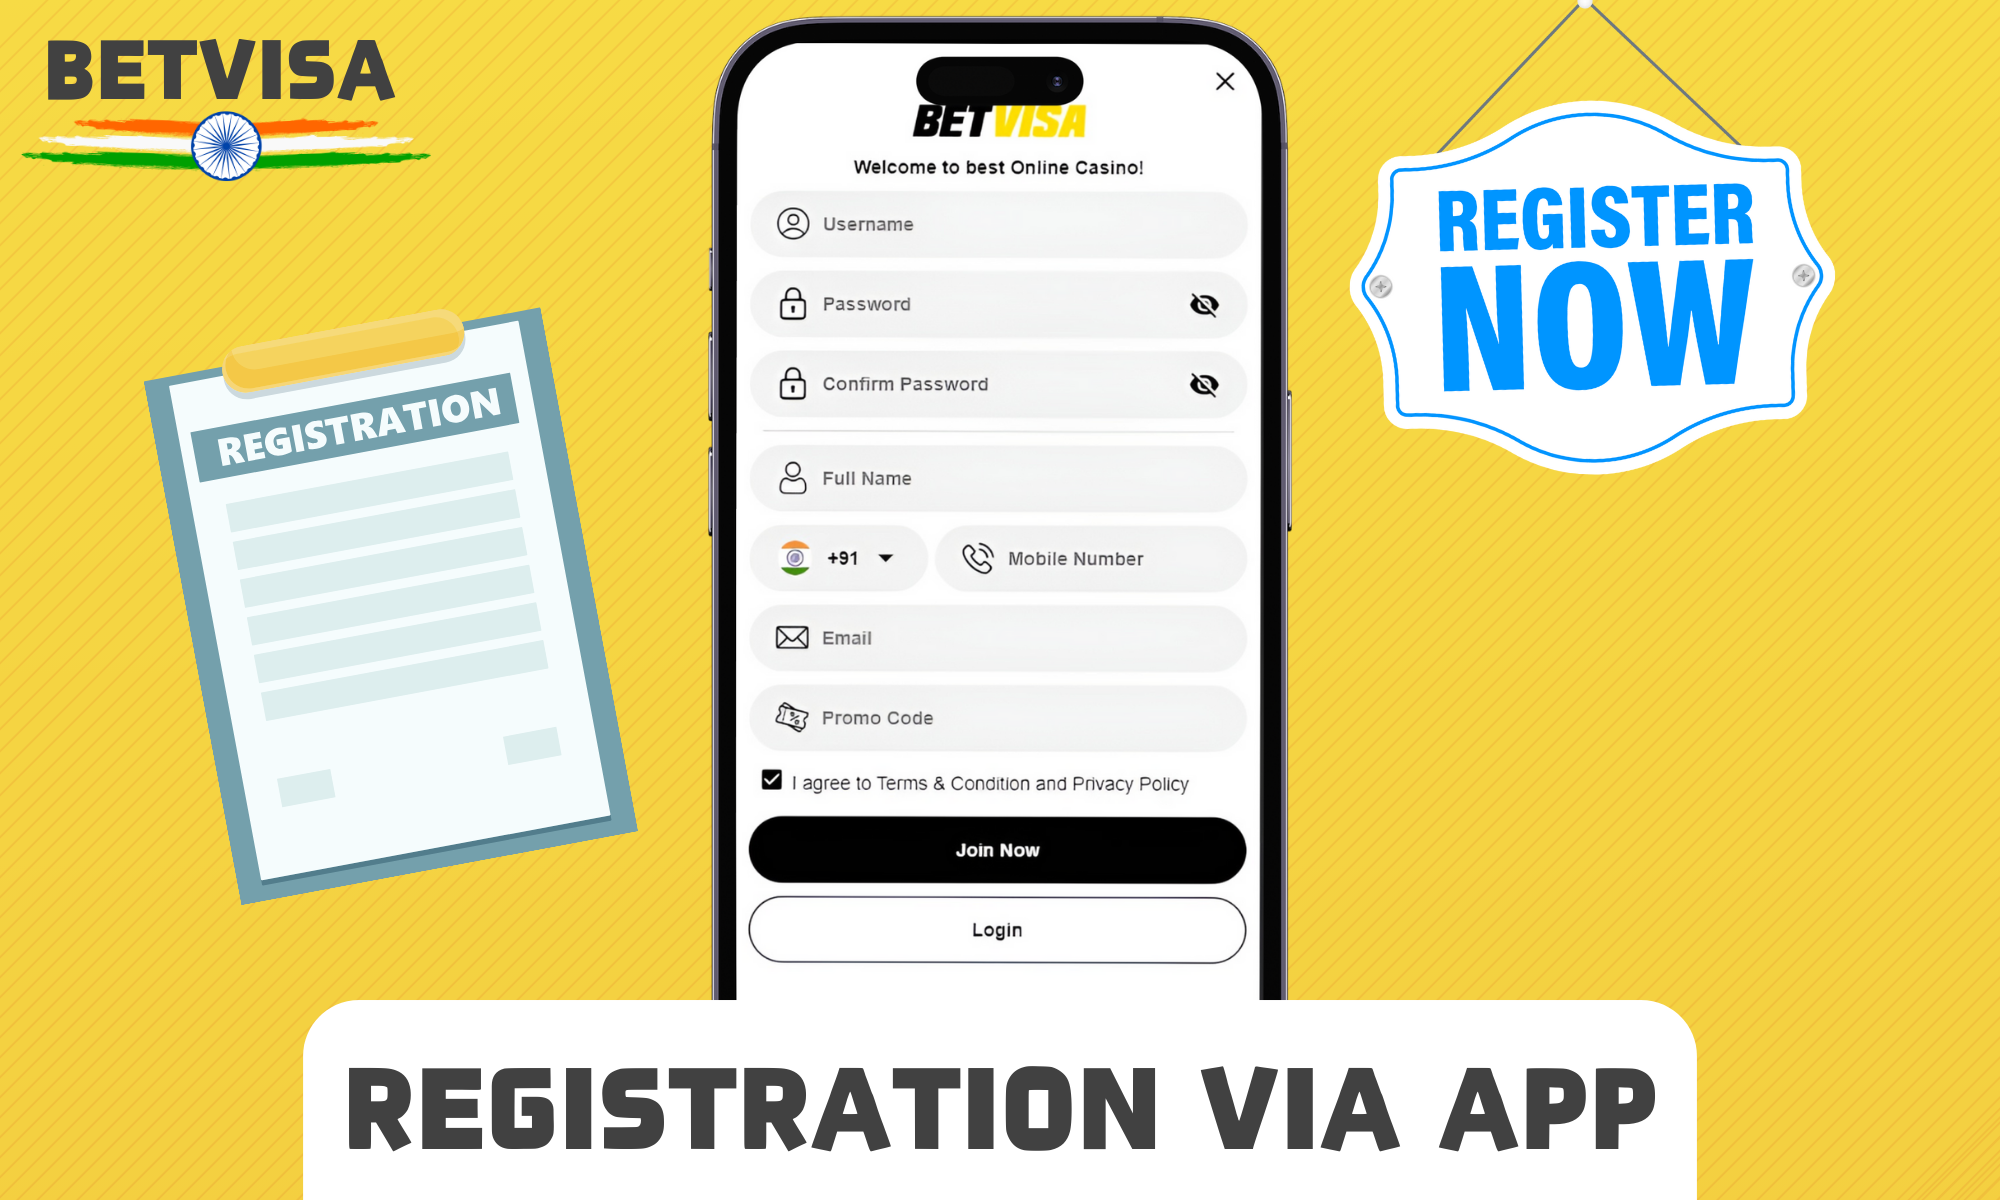 Step-by-step registration in the Betvisa app